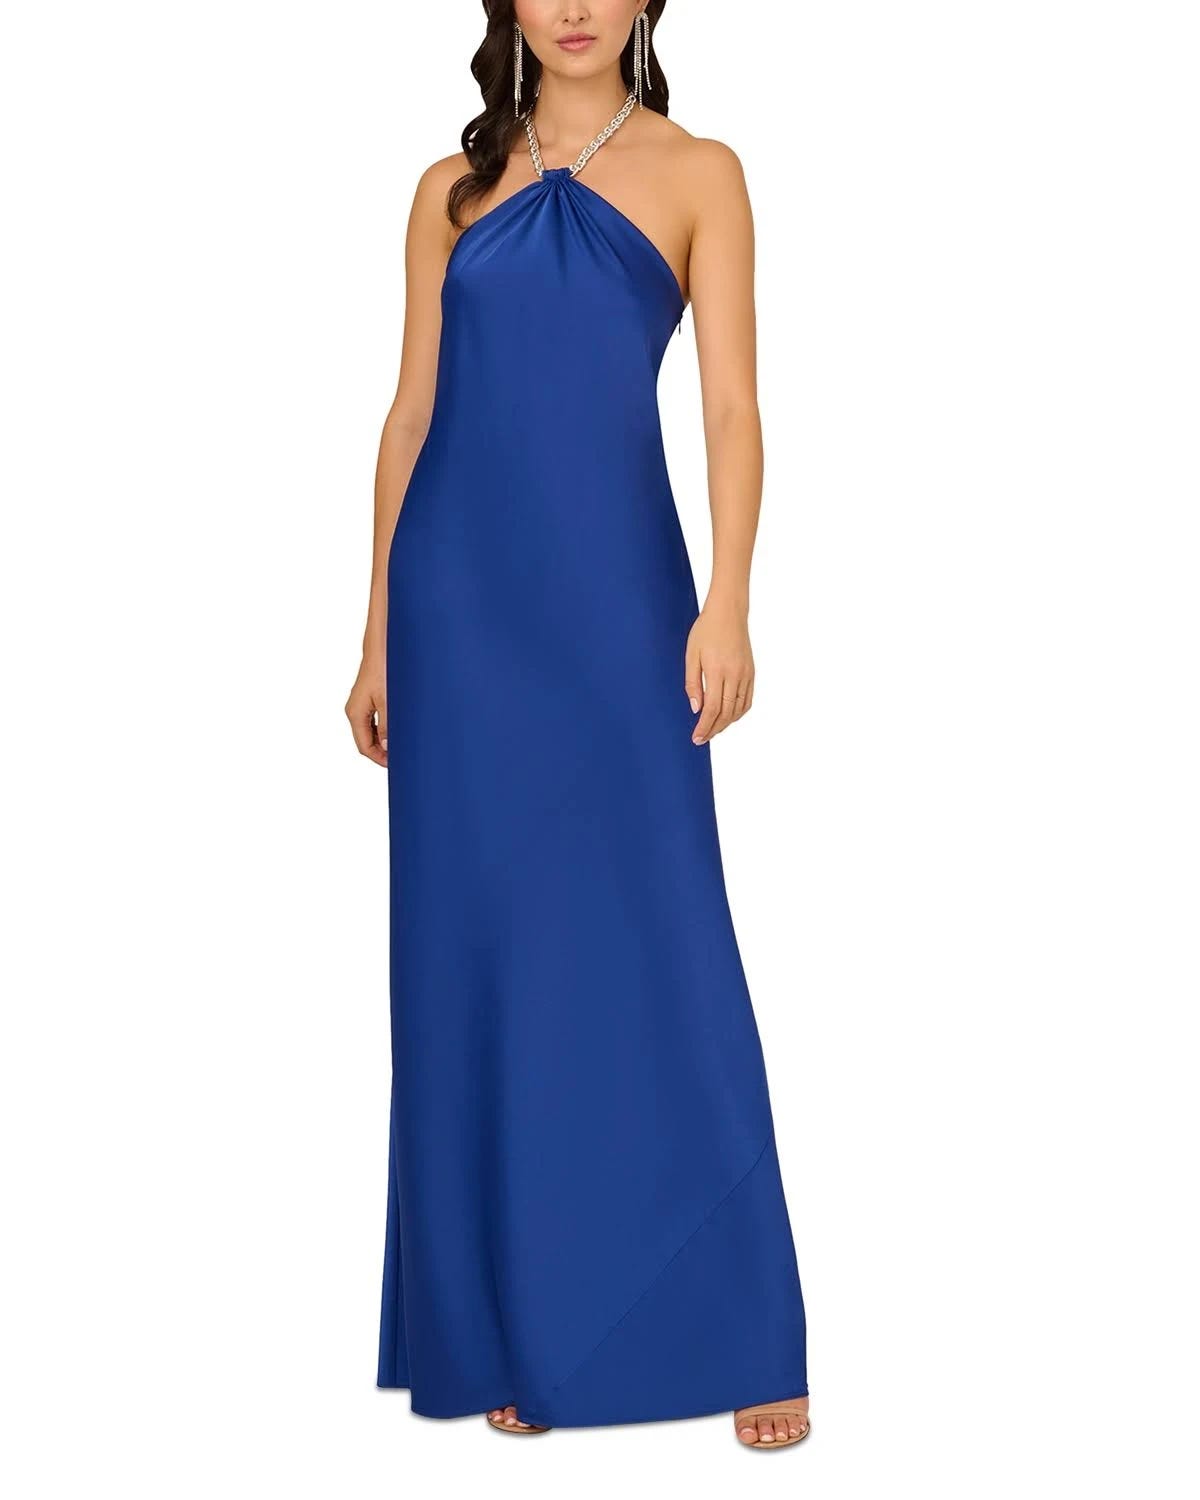 Vibrant Satin Chain Halter Gown in Dynasty Blue | Image